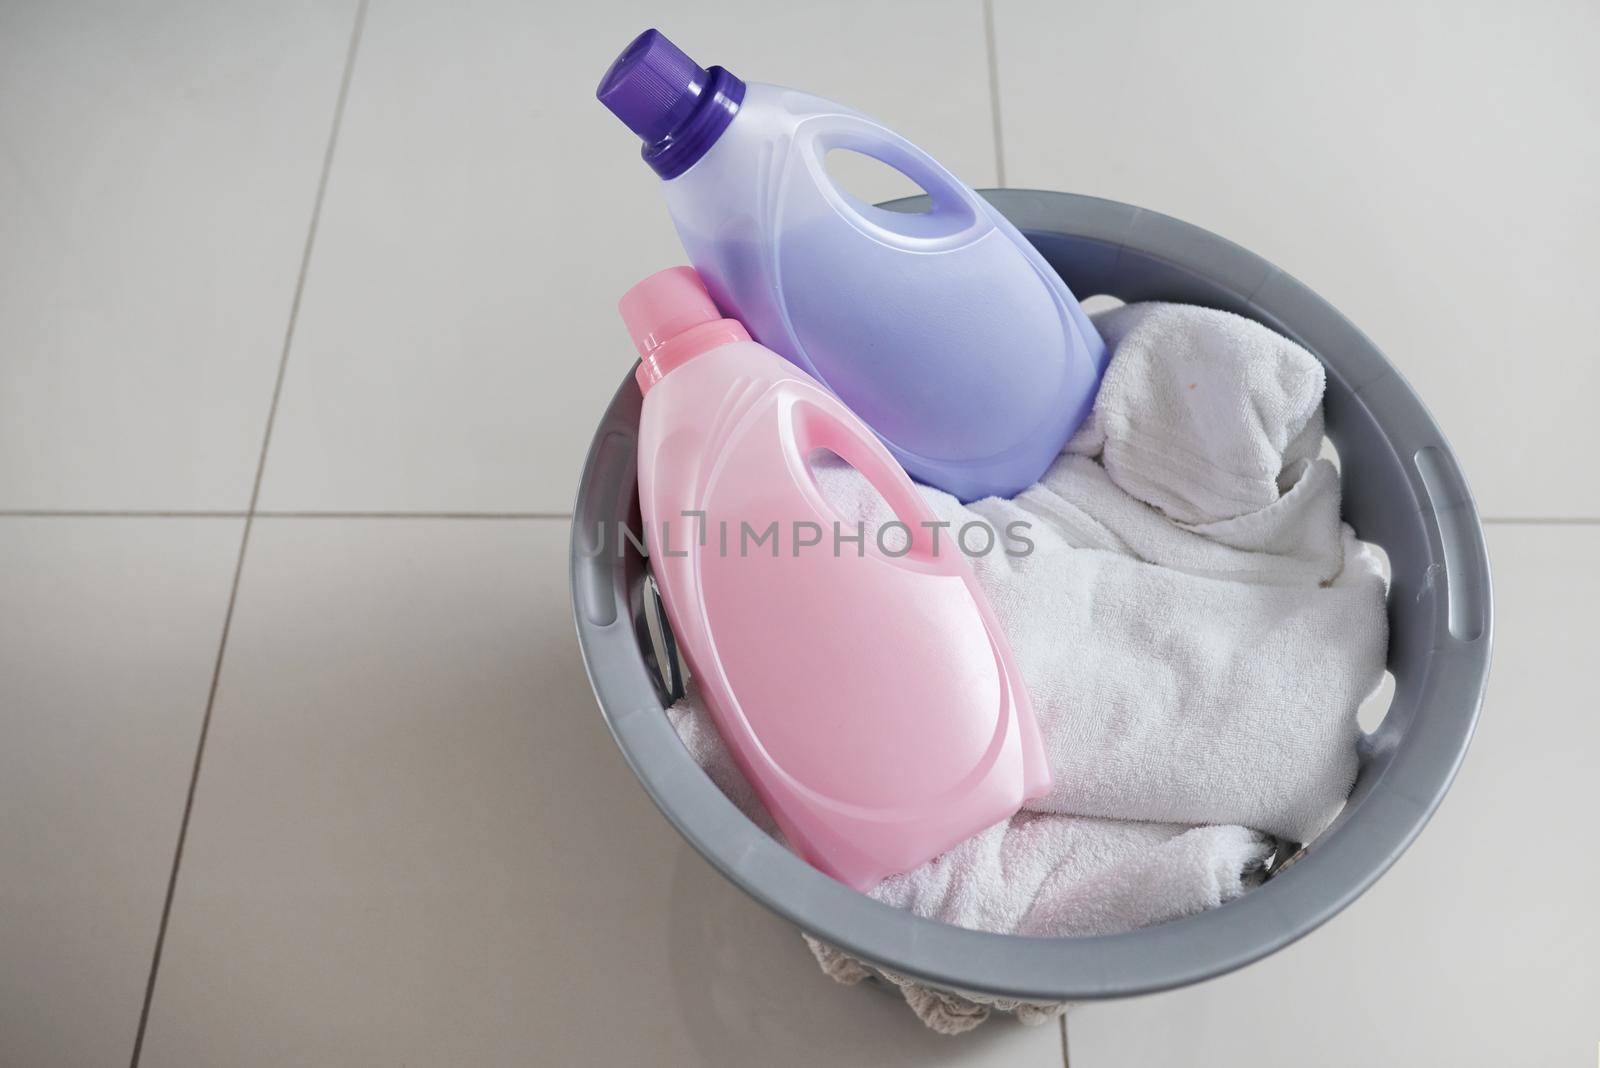 Fabric softener for those laundry days when youre feeling extra. High angle shot of a washing basket filled with clean laundry and two bottles of fabric softener. by YuriArcurs